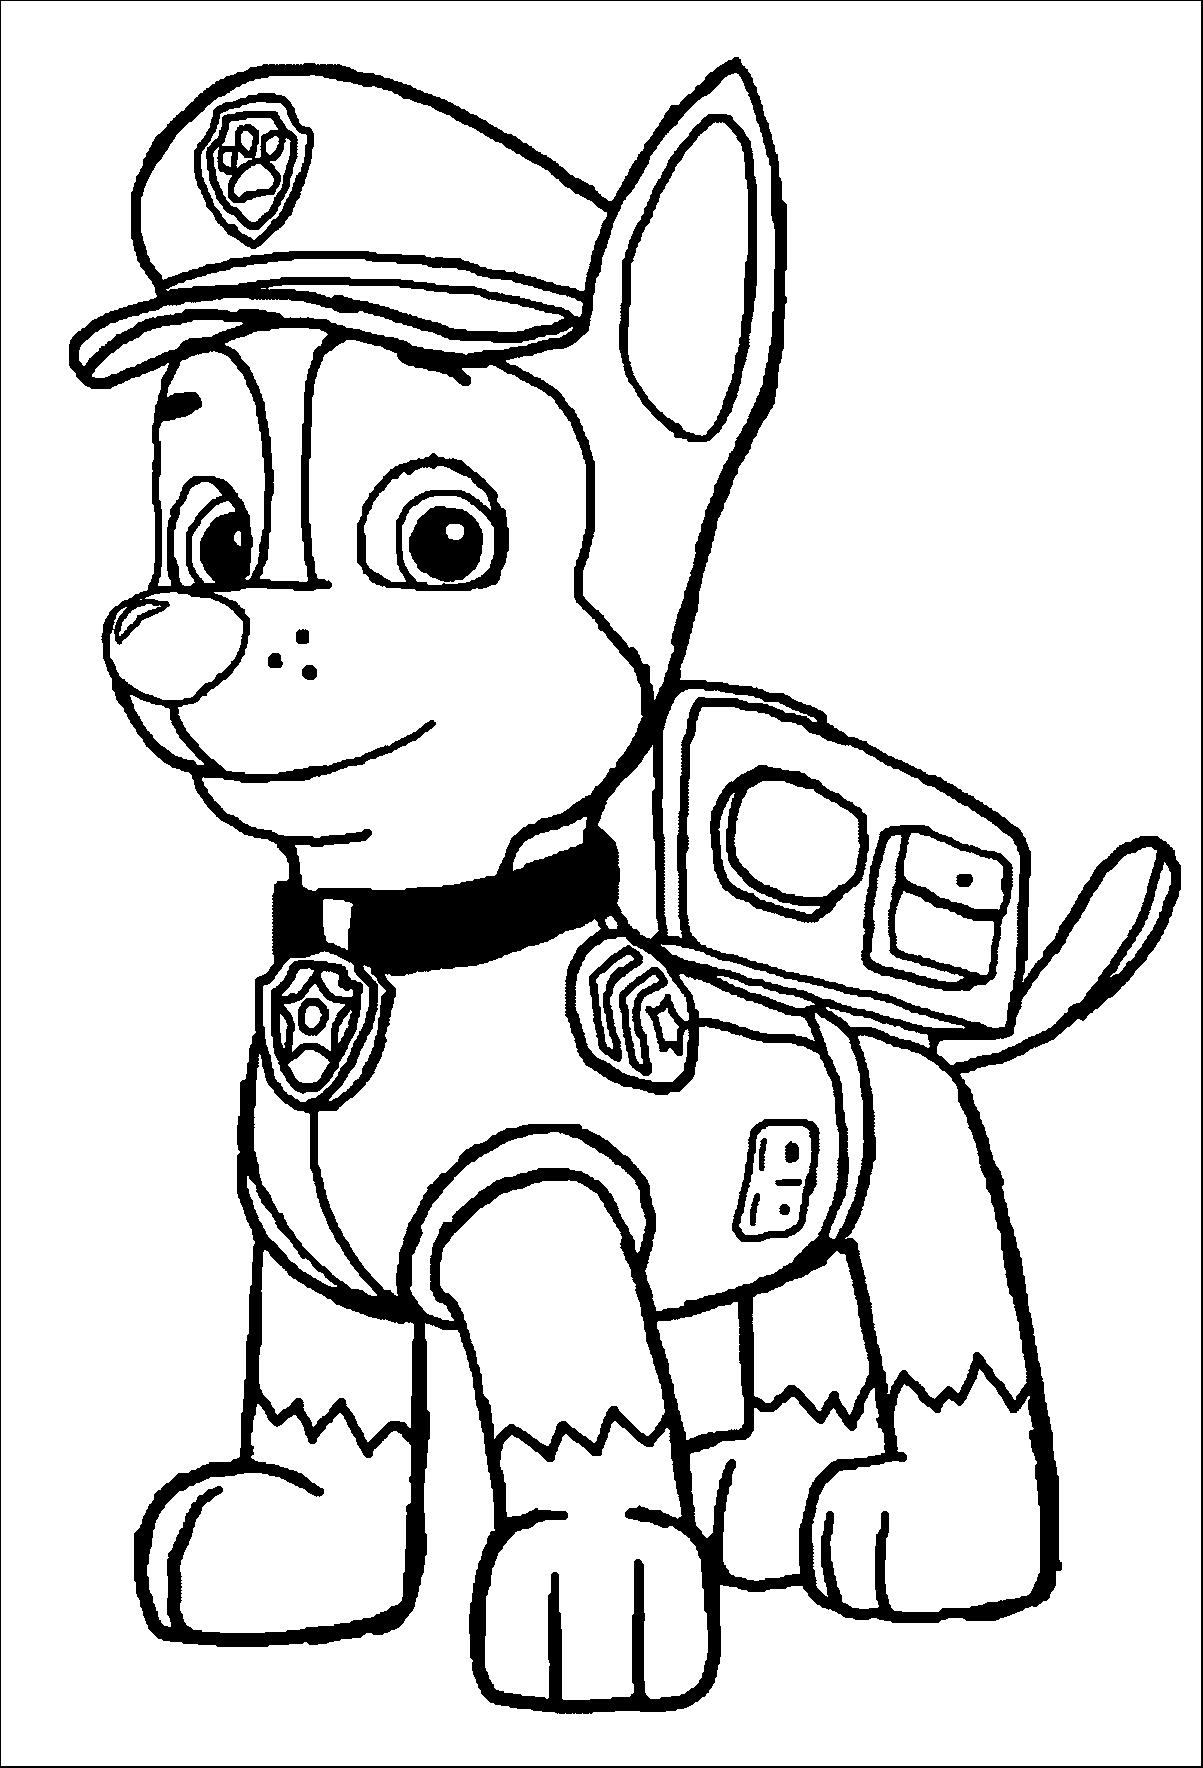 Chase Police Pup Paw Patrol 3 Dog Coloring Page | Wecoloringpage